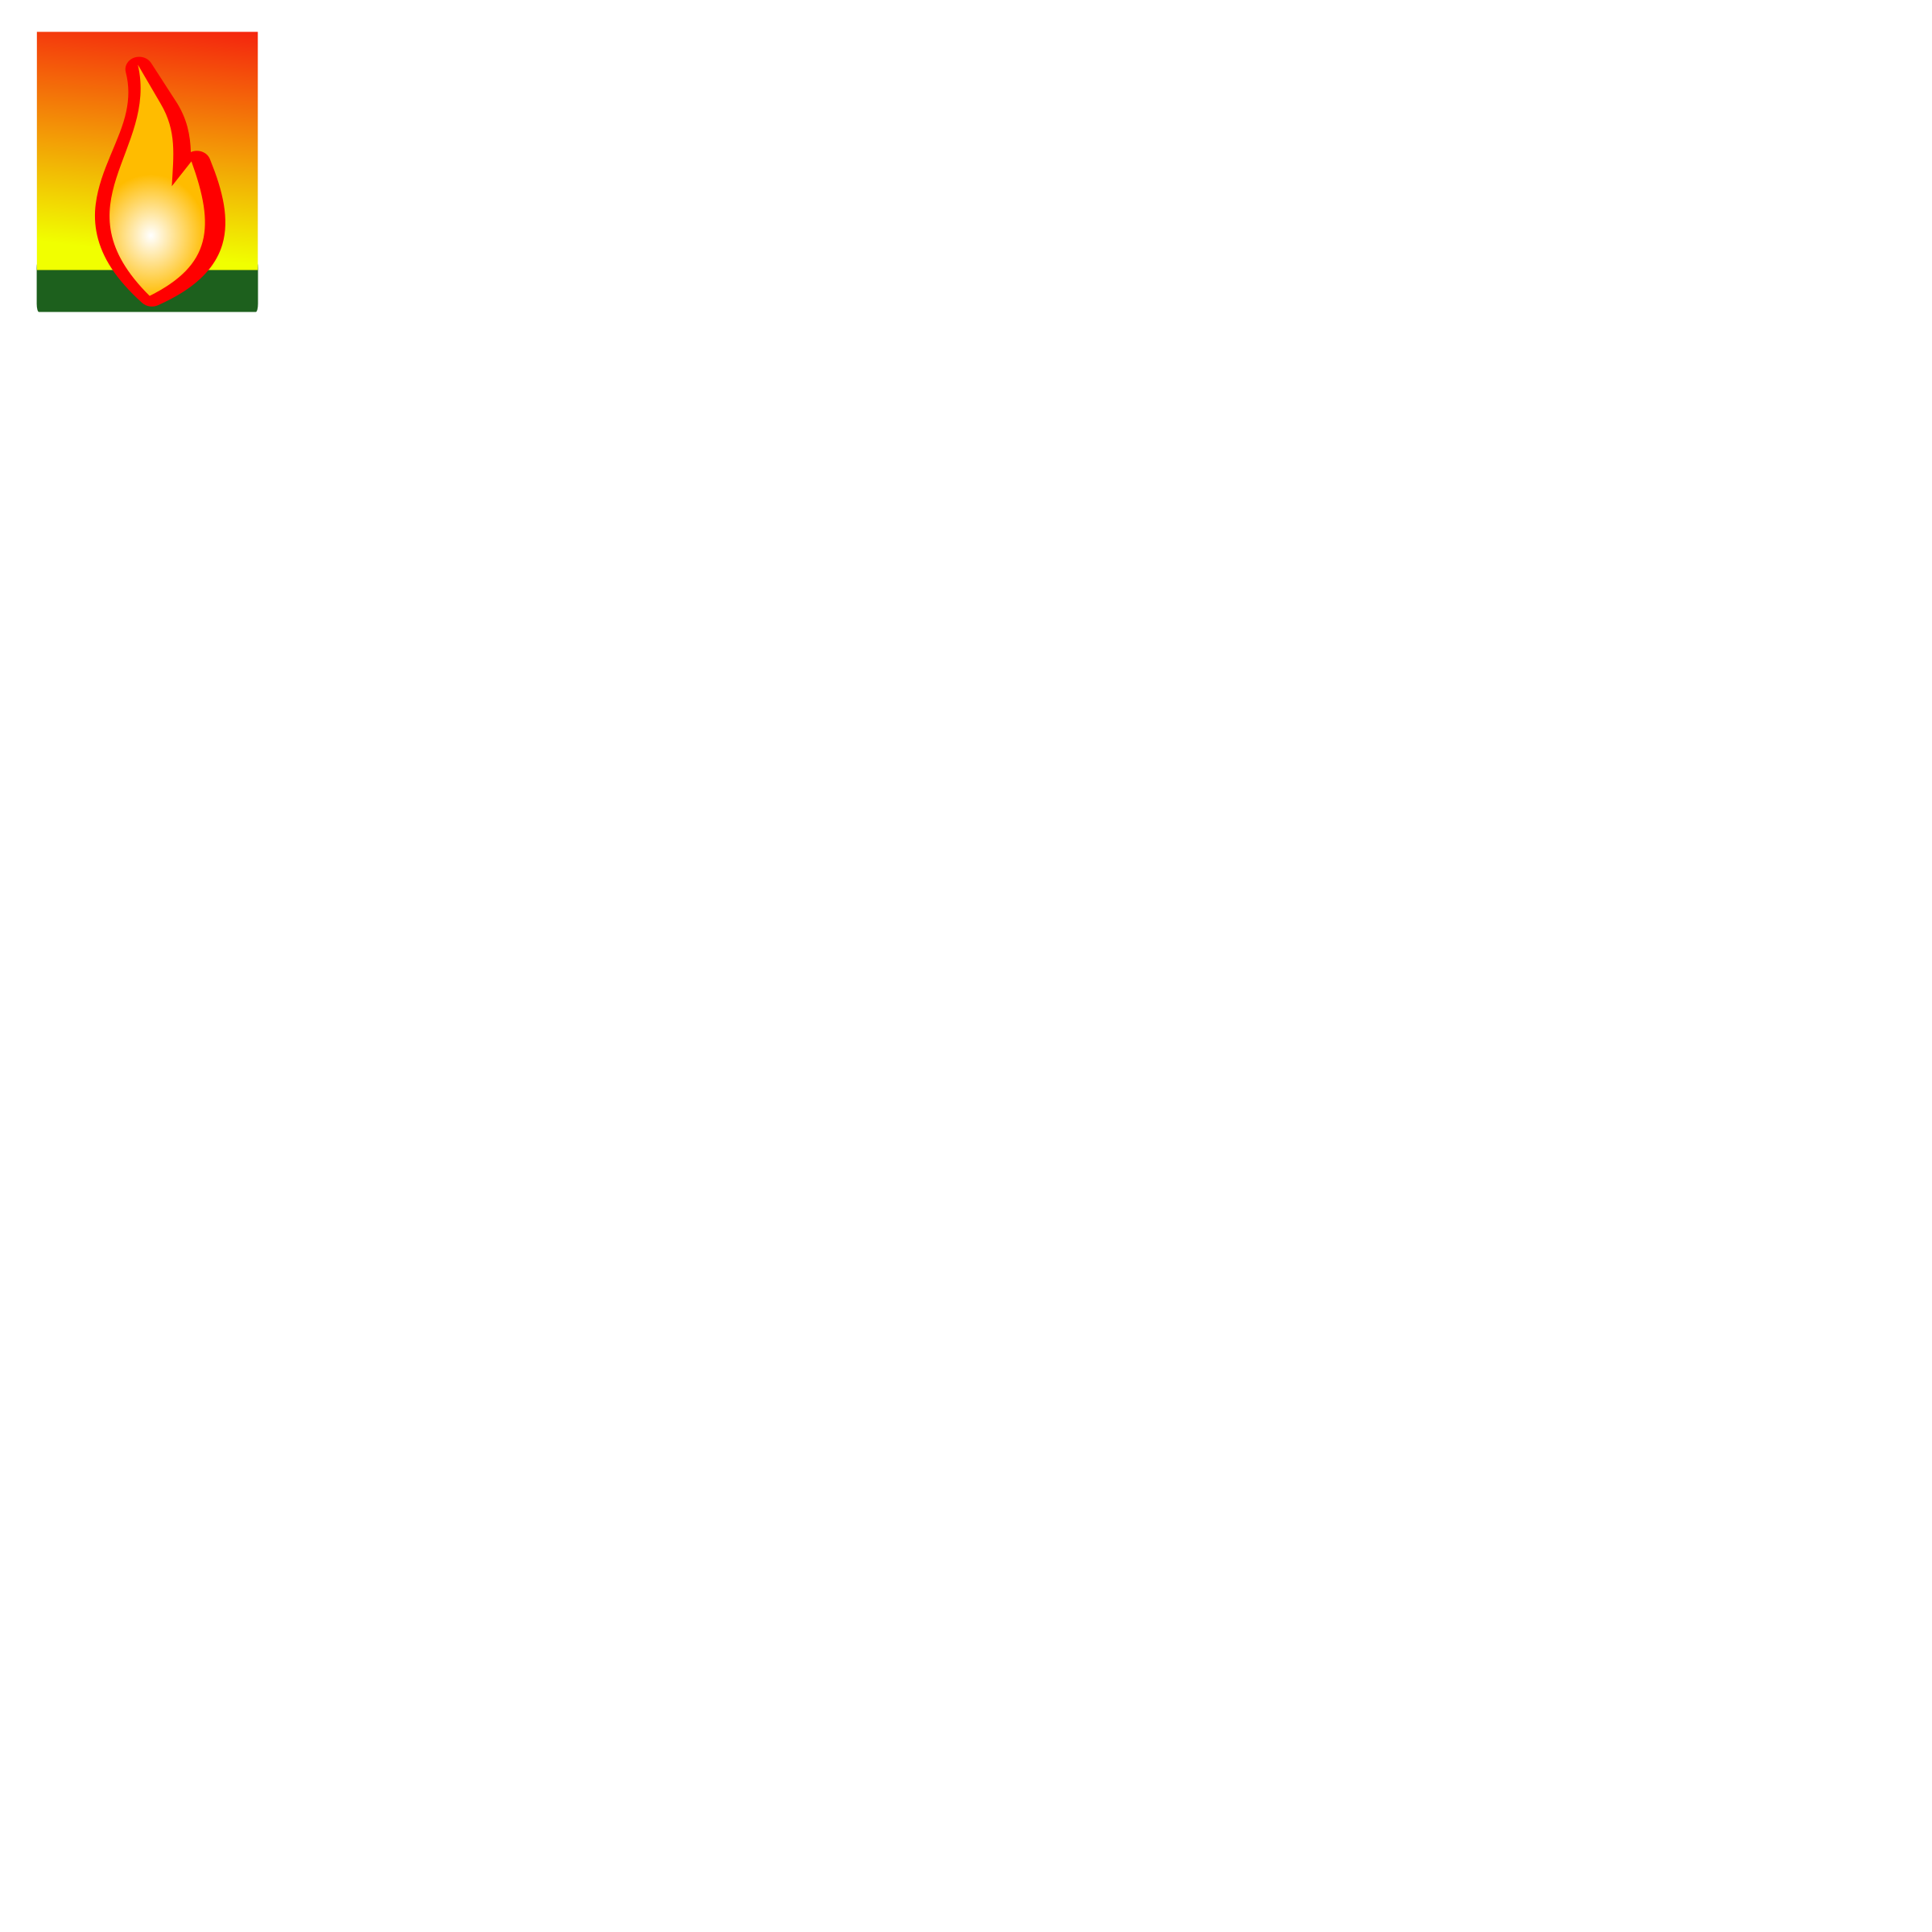 clipart flames animated